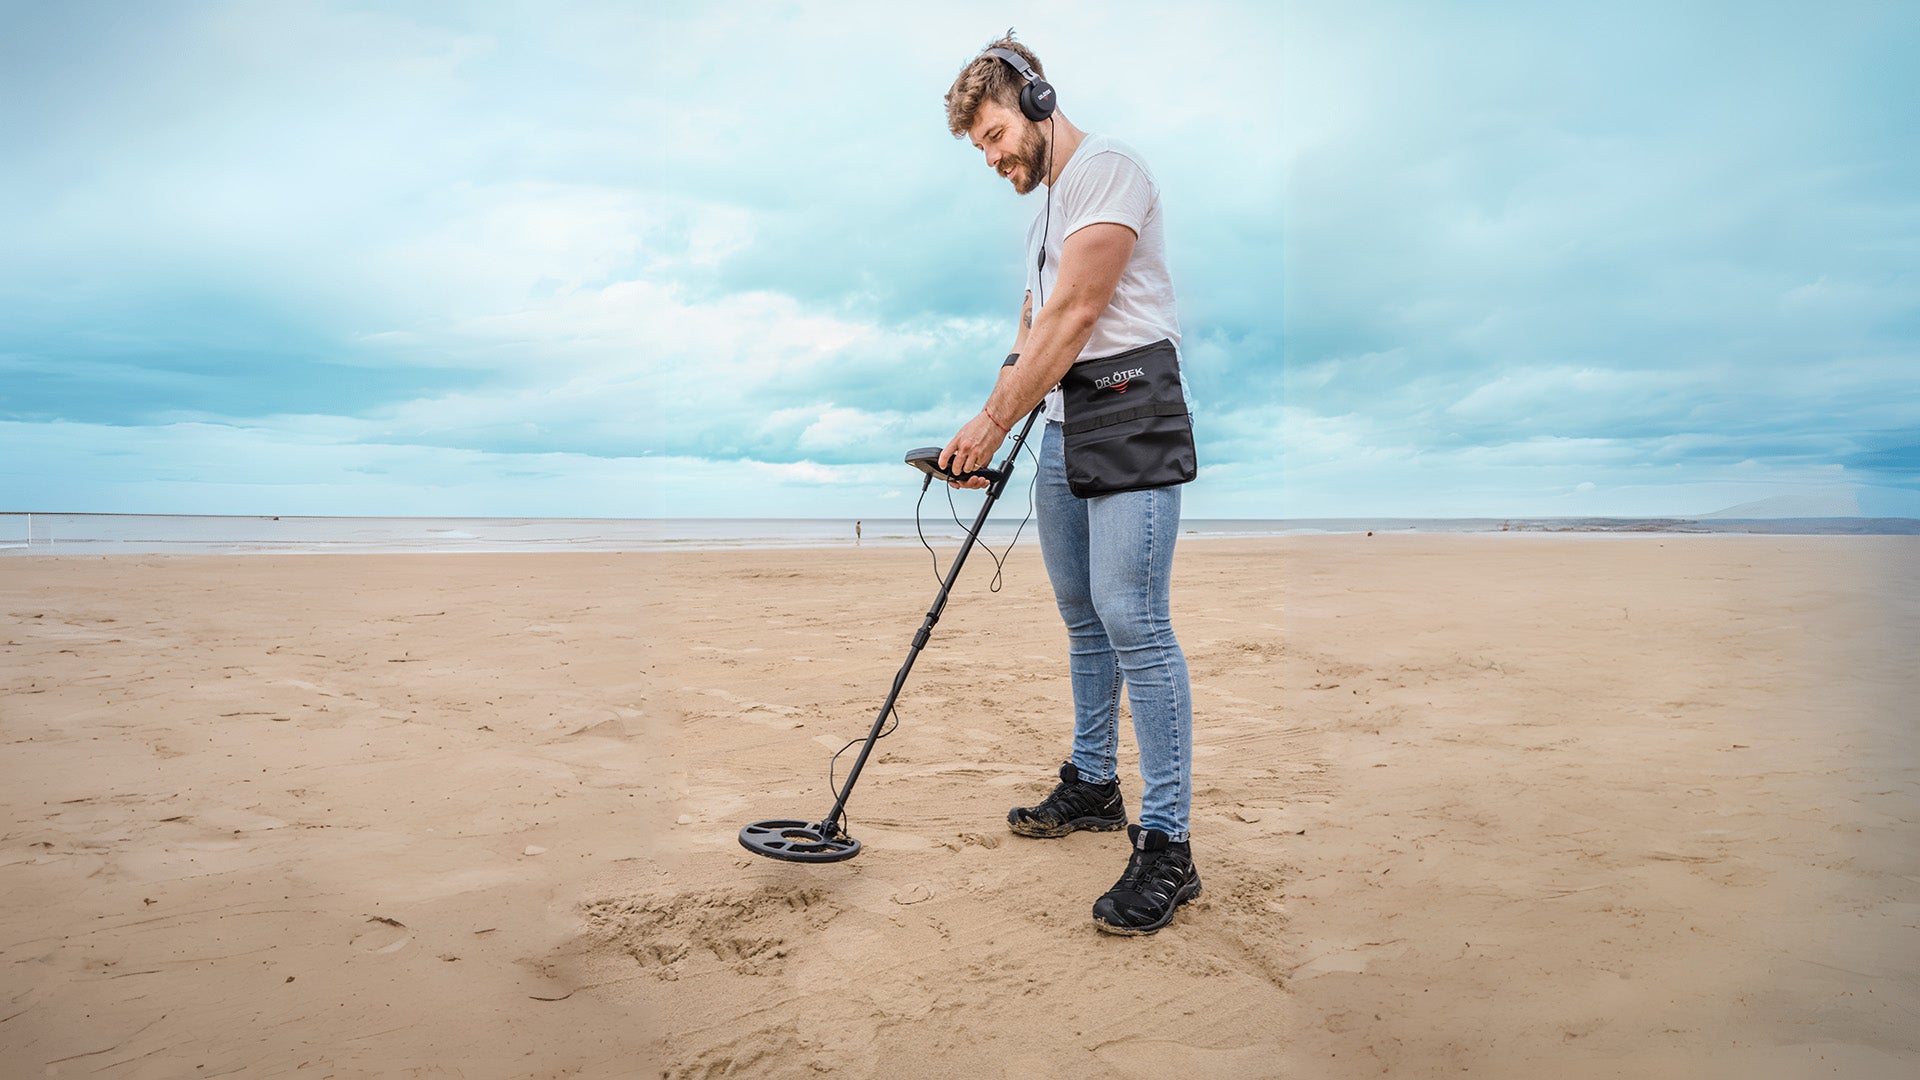 Using a metal detector on the sandy beach